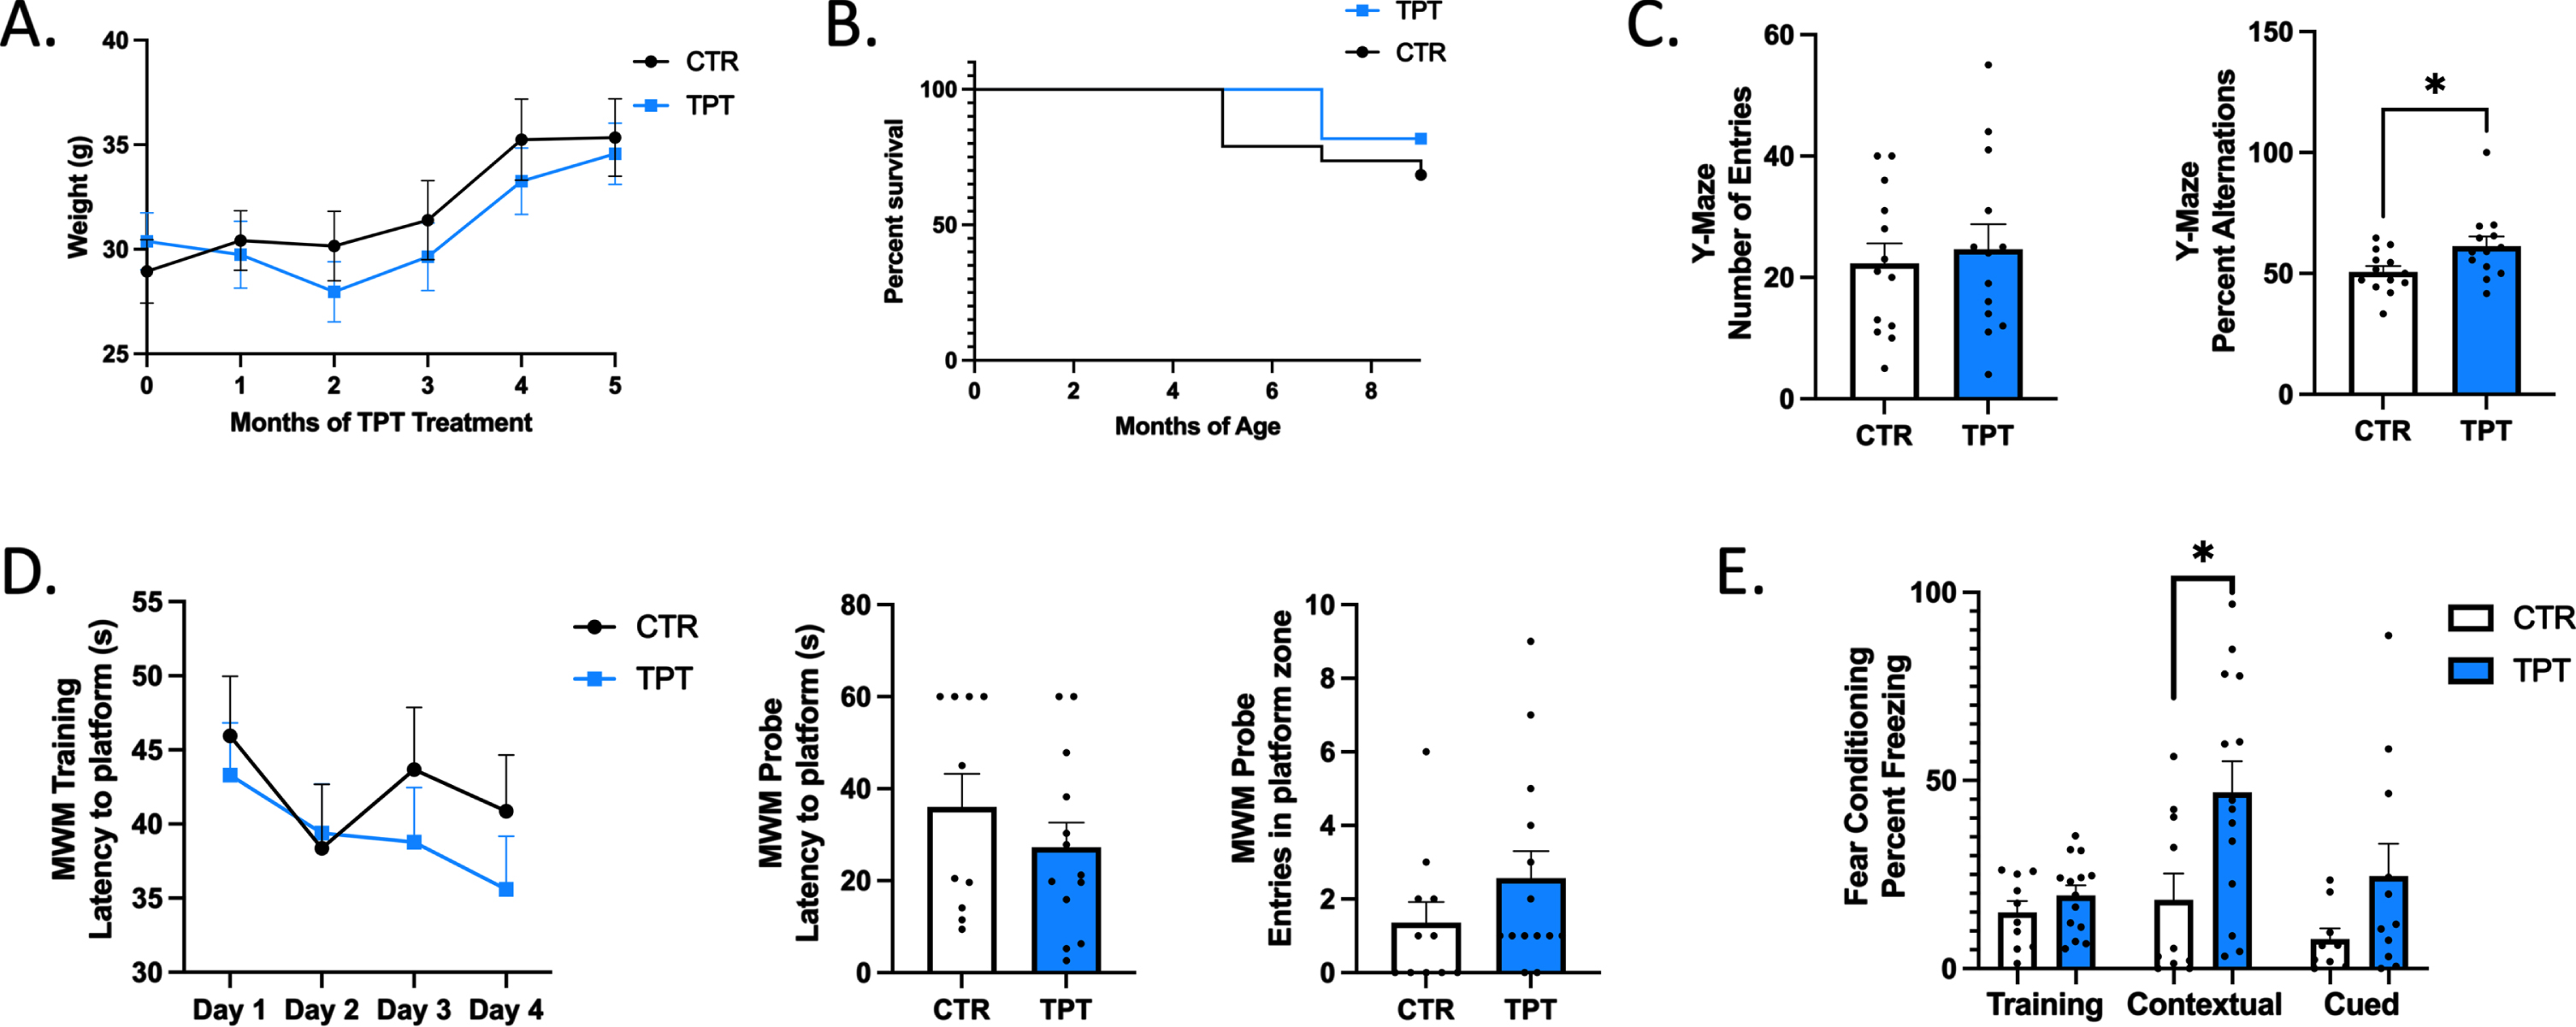 Chronic TPT-172 administration in Ts65dn mice improves performance in learning and memory behavioral paradigms. A) Average weight of Ts65dn mice receiving vehicle (CTR) or TPT-172 (TPT) throughout the study. B) Percent survival of Ts65dn mice receiving vehicle (CTR) or TPT-172 (TPT) throughout the study until the time of sacrifice (9 months of age). C) Number of entries and percent alternations in the Y-maze paradigm. D) Latency to reach the hidden platform over 4 consecutive days of training in the Morris water maze training phase, and latency to reach the platform zone and number of entries into the platform zone in the Morris water maze probe test. E) Percent freezing in the training, contextual, and cued phases of the fear conditioning paradigm. (n = 11 CTR, 13 TPT). Values represent mean±standard error of the mean, *p < 0.05.